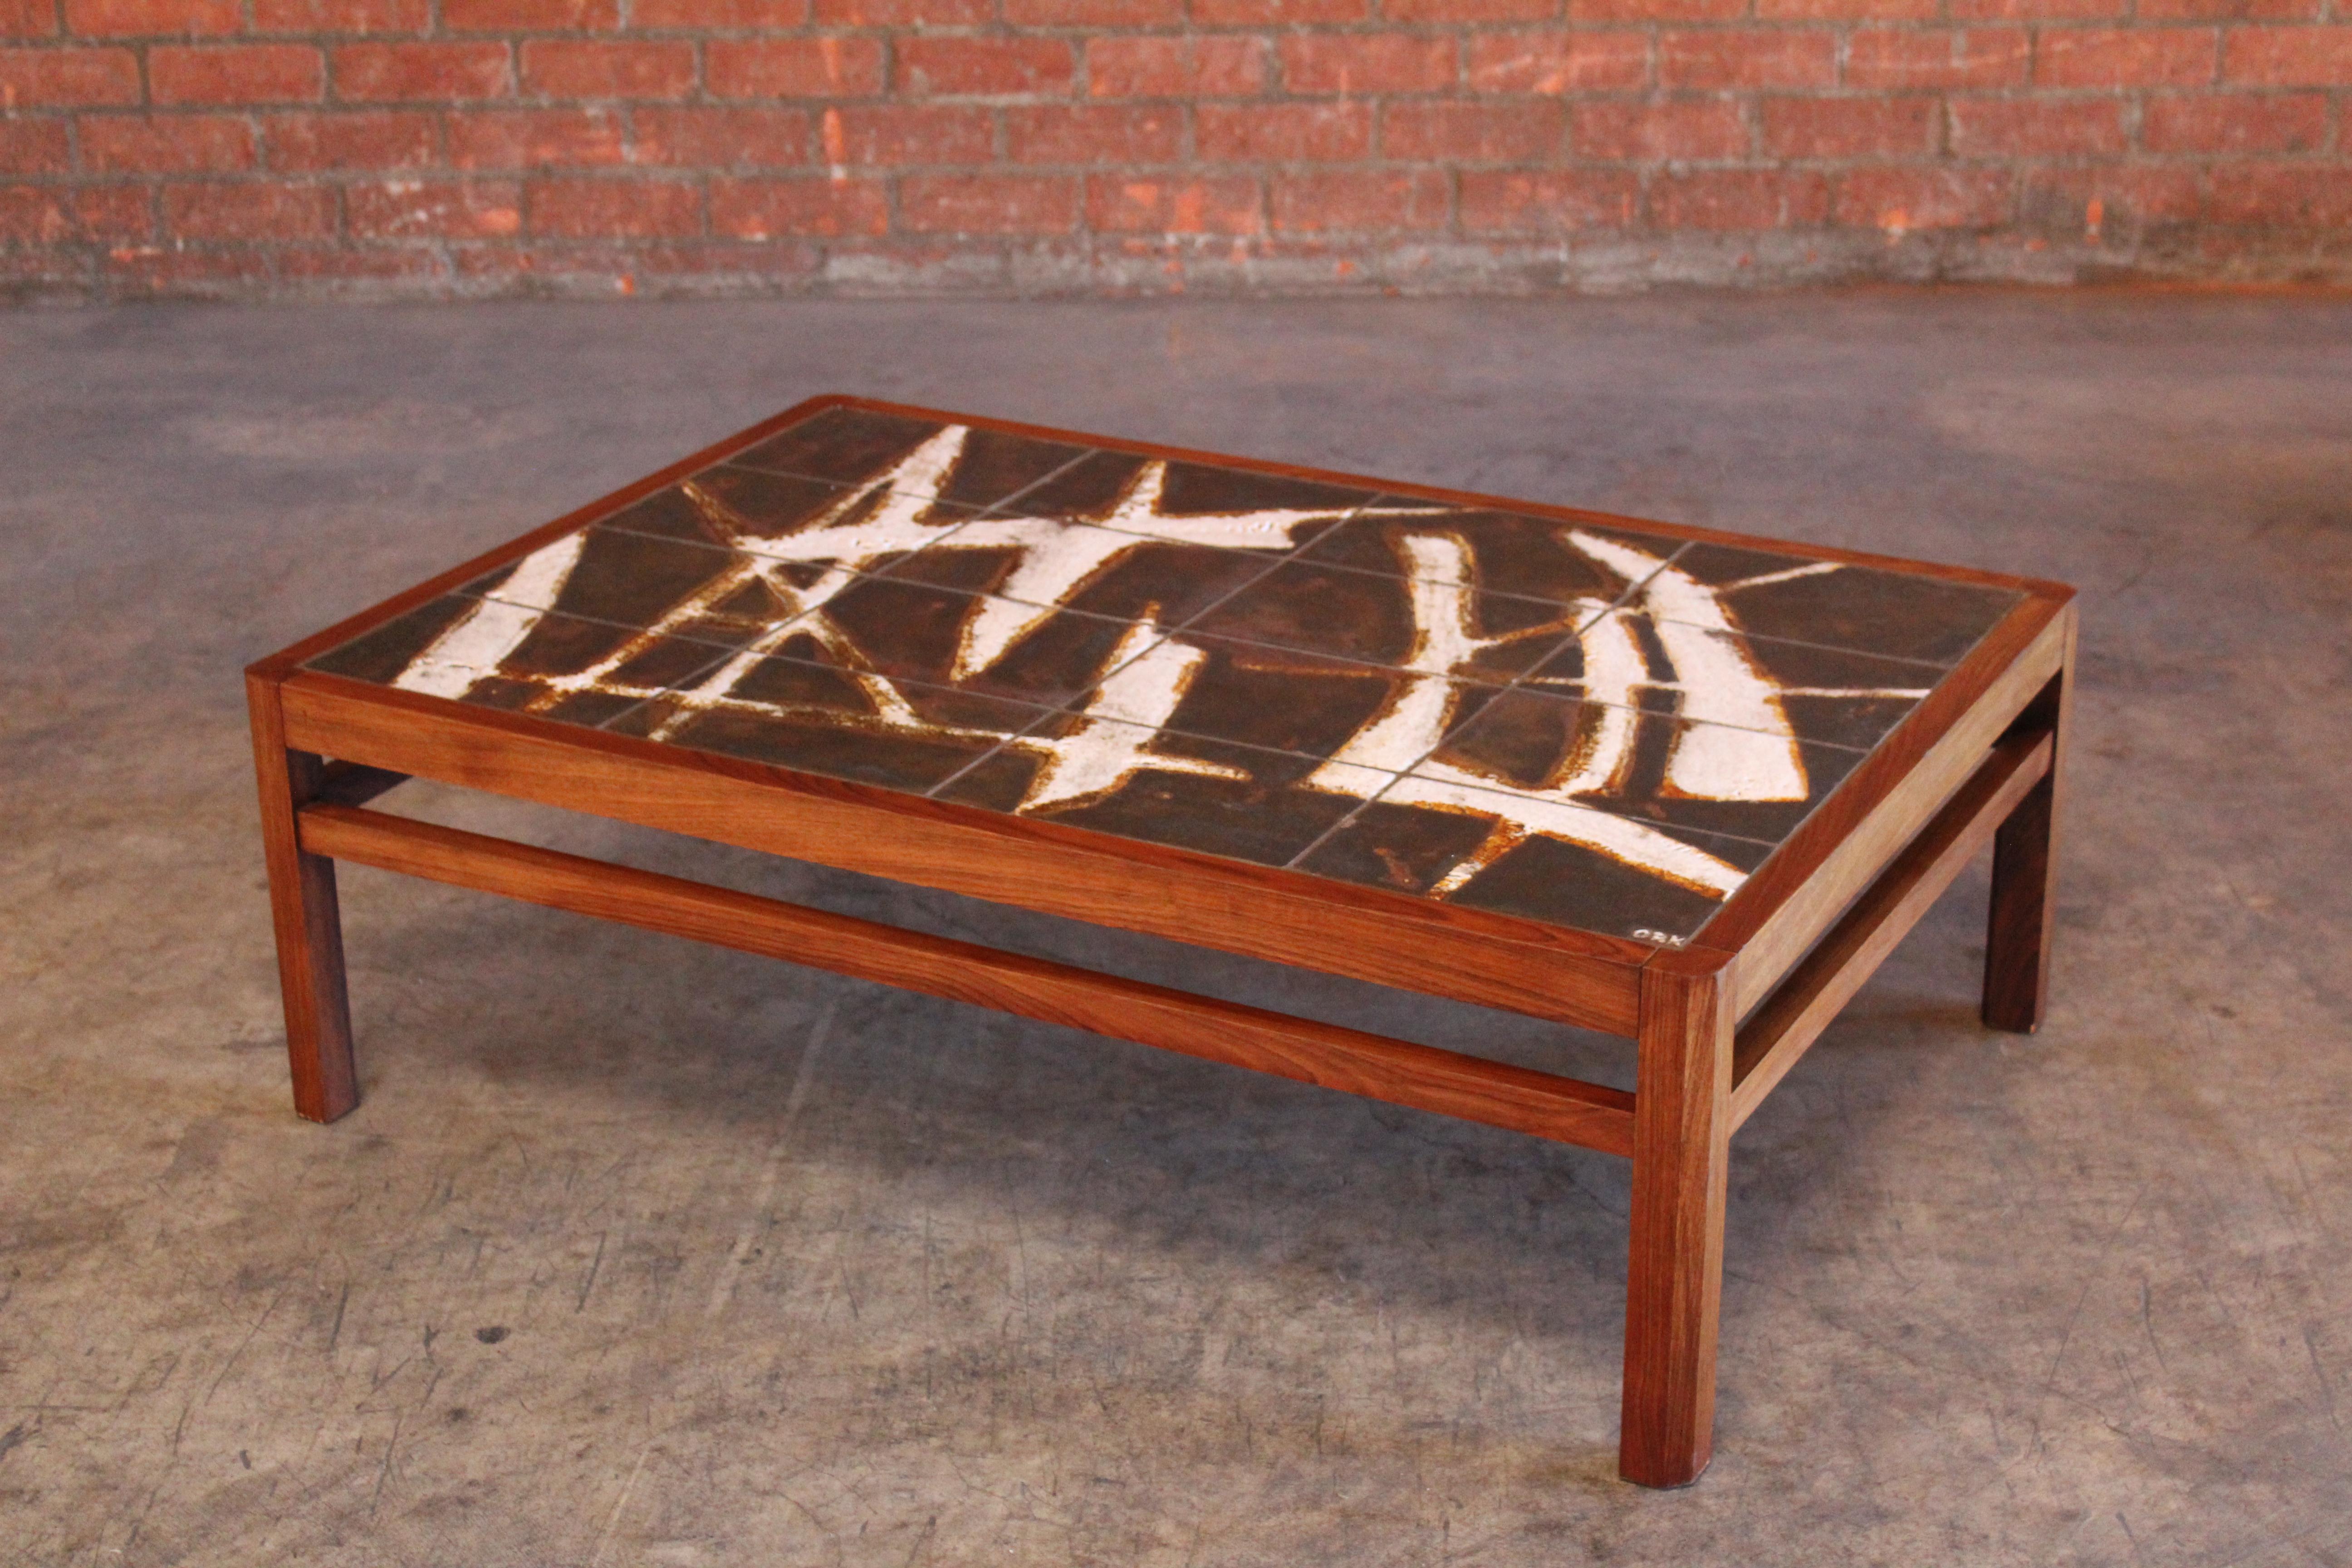 Danish Rosewood and Ceramic Tile Coffee Table by Ole Bjorn Krüger, 1960s In Good Condition For Sale In Los Angeles, CA